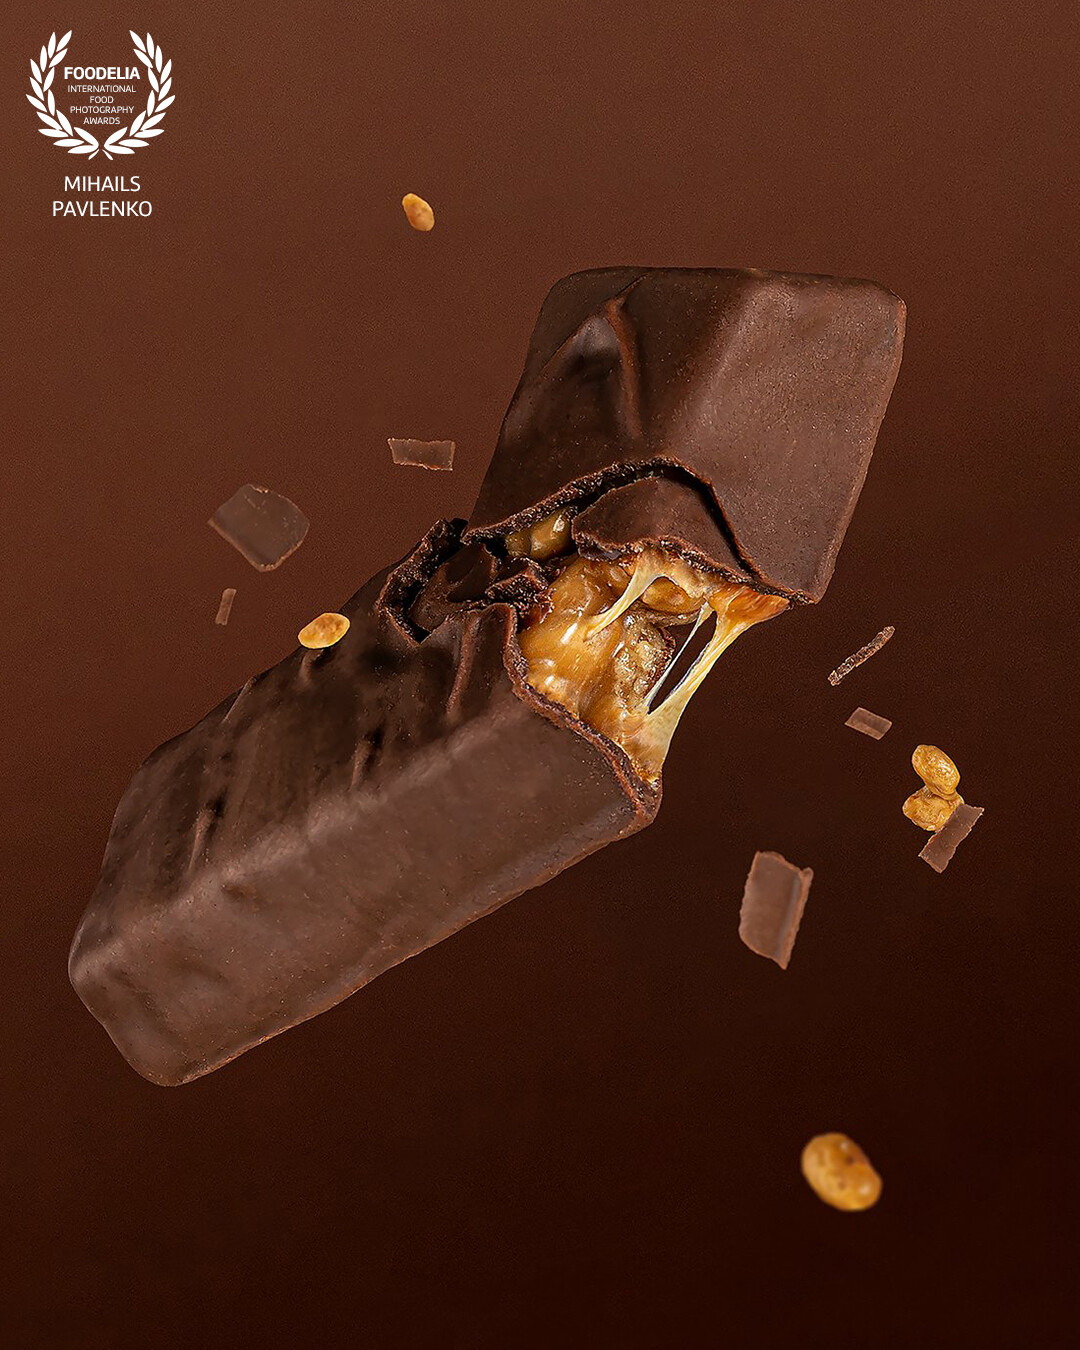 How to make mouthwatering shot from one chocolate bar in one attempt?<br />
Product @lidlde and @lidllatvija